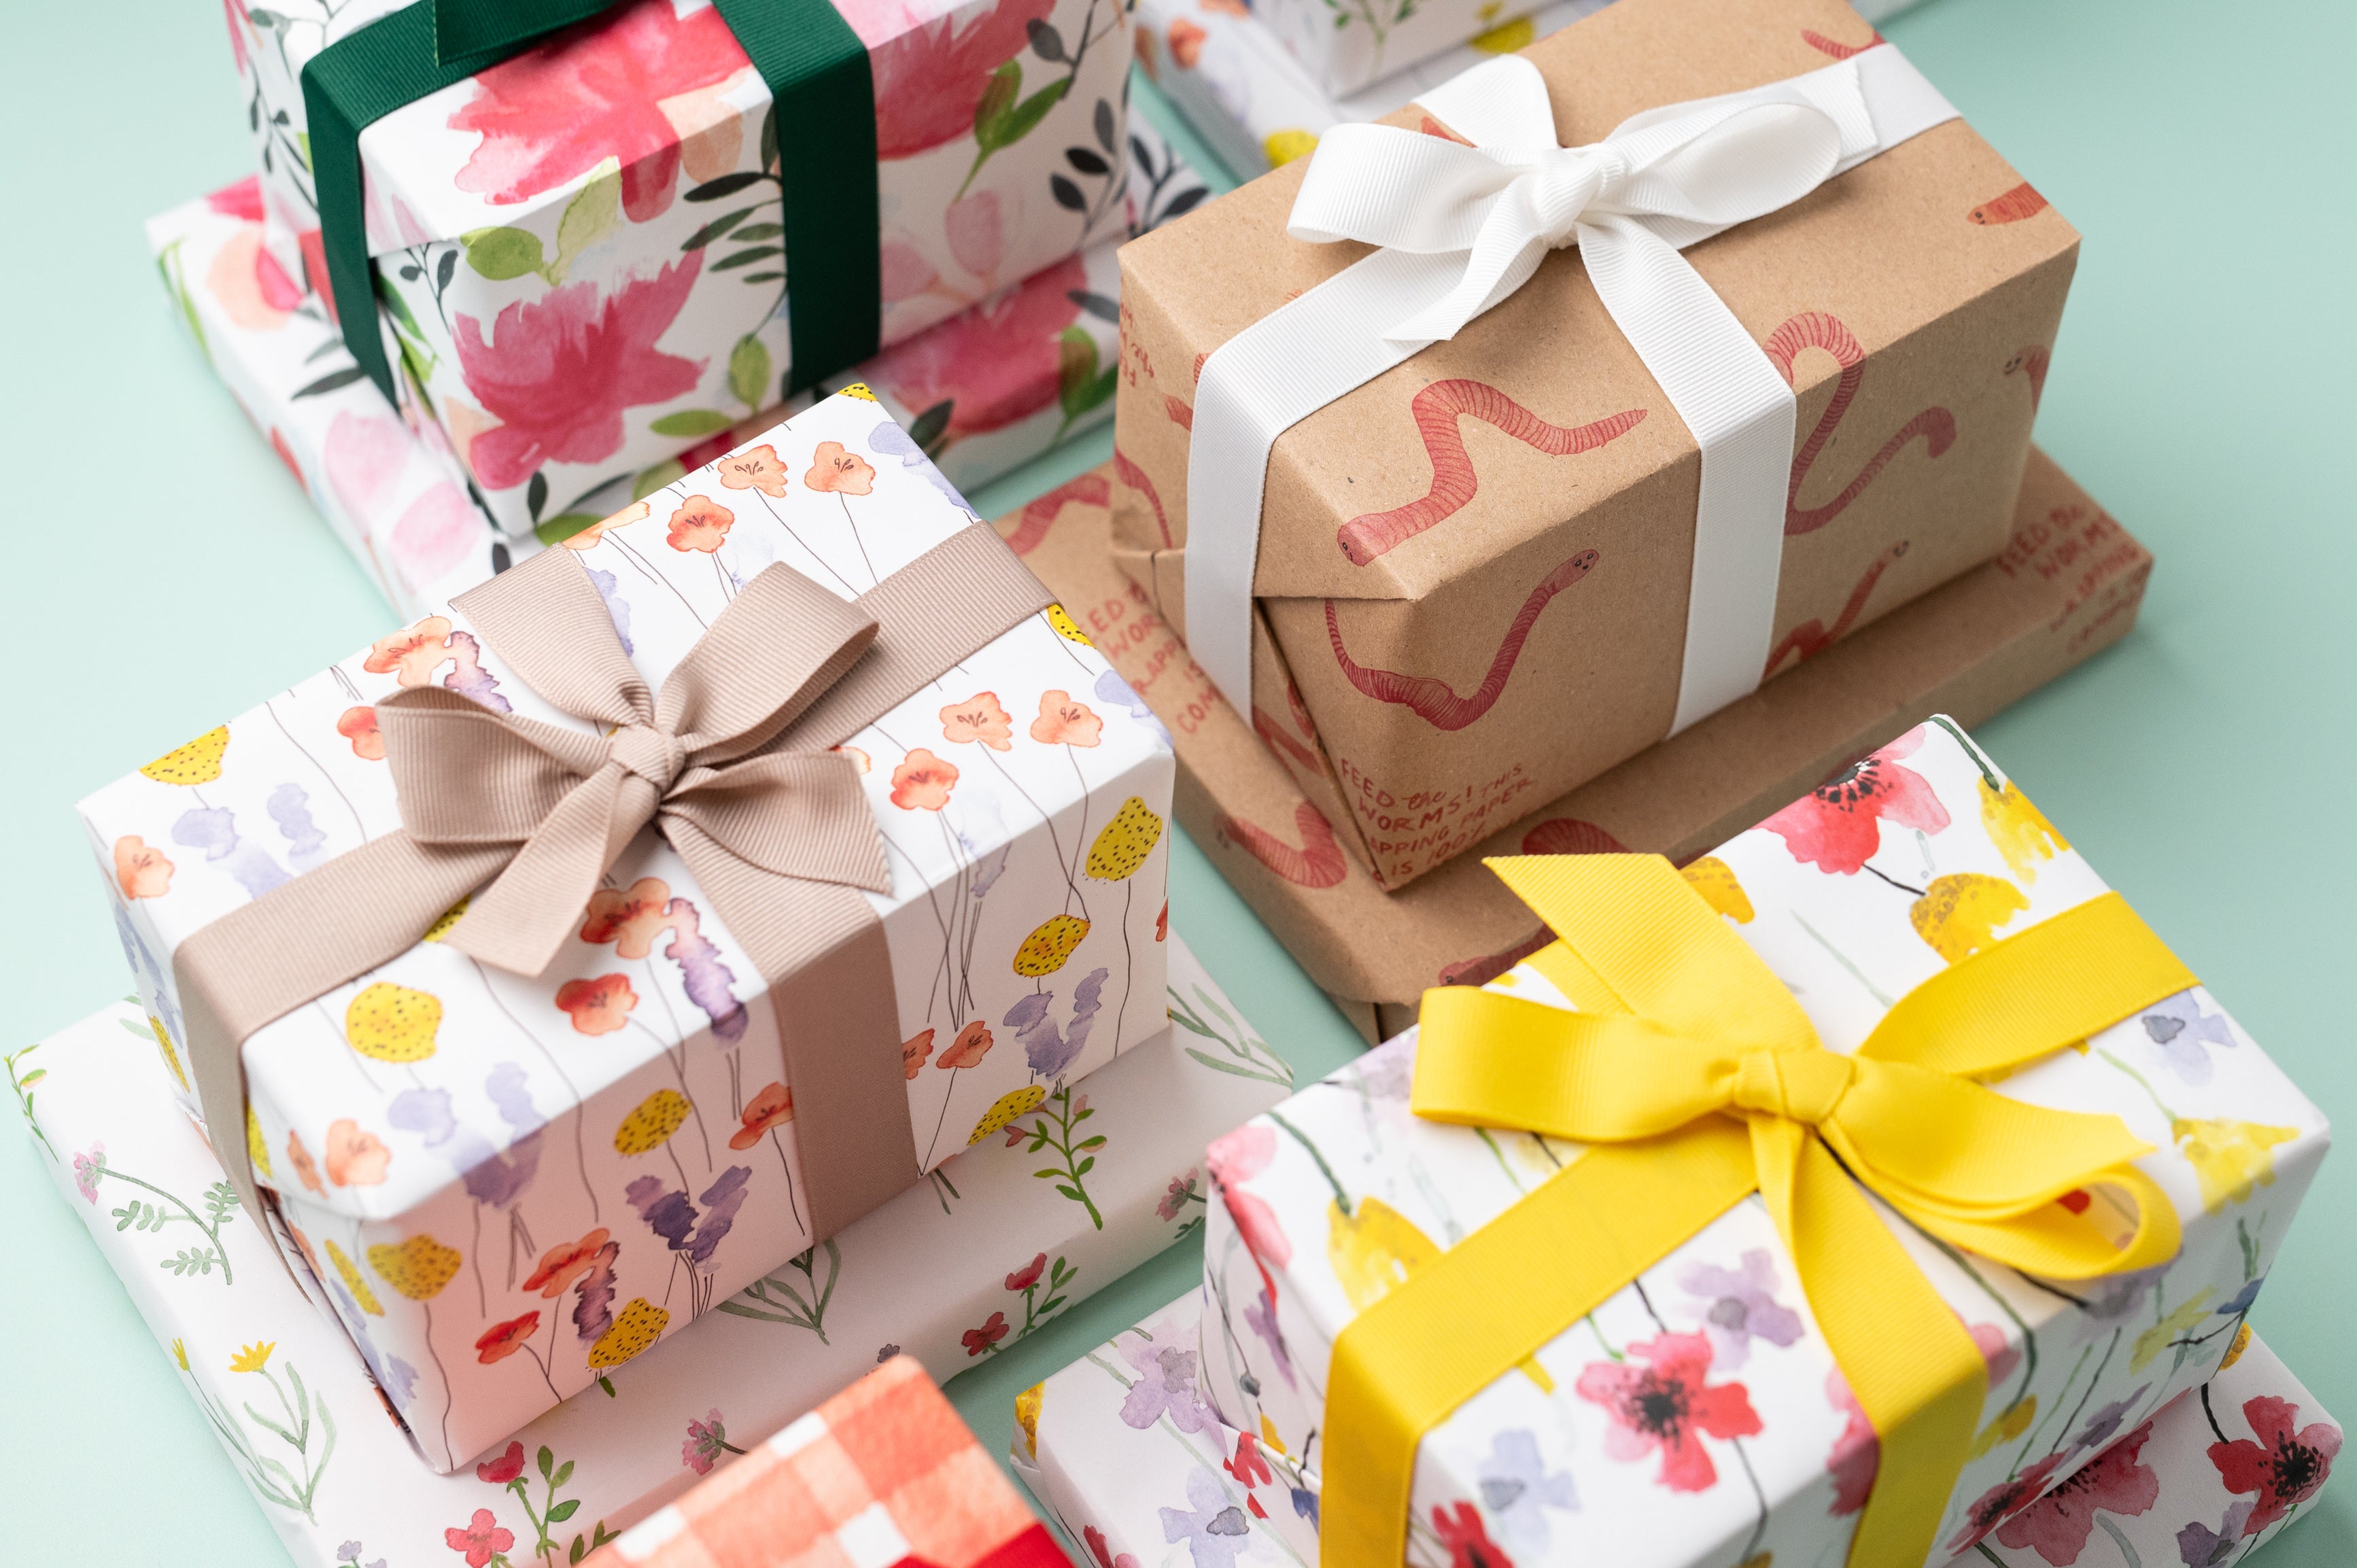 A selection of presents wrapped in Ruby & Bo recycled wrapping paper on a mint green background